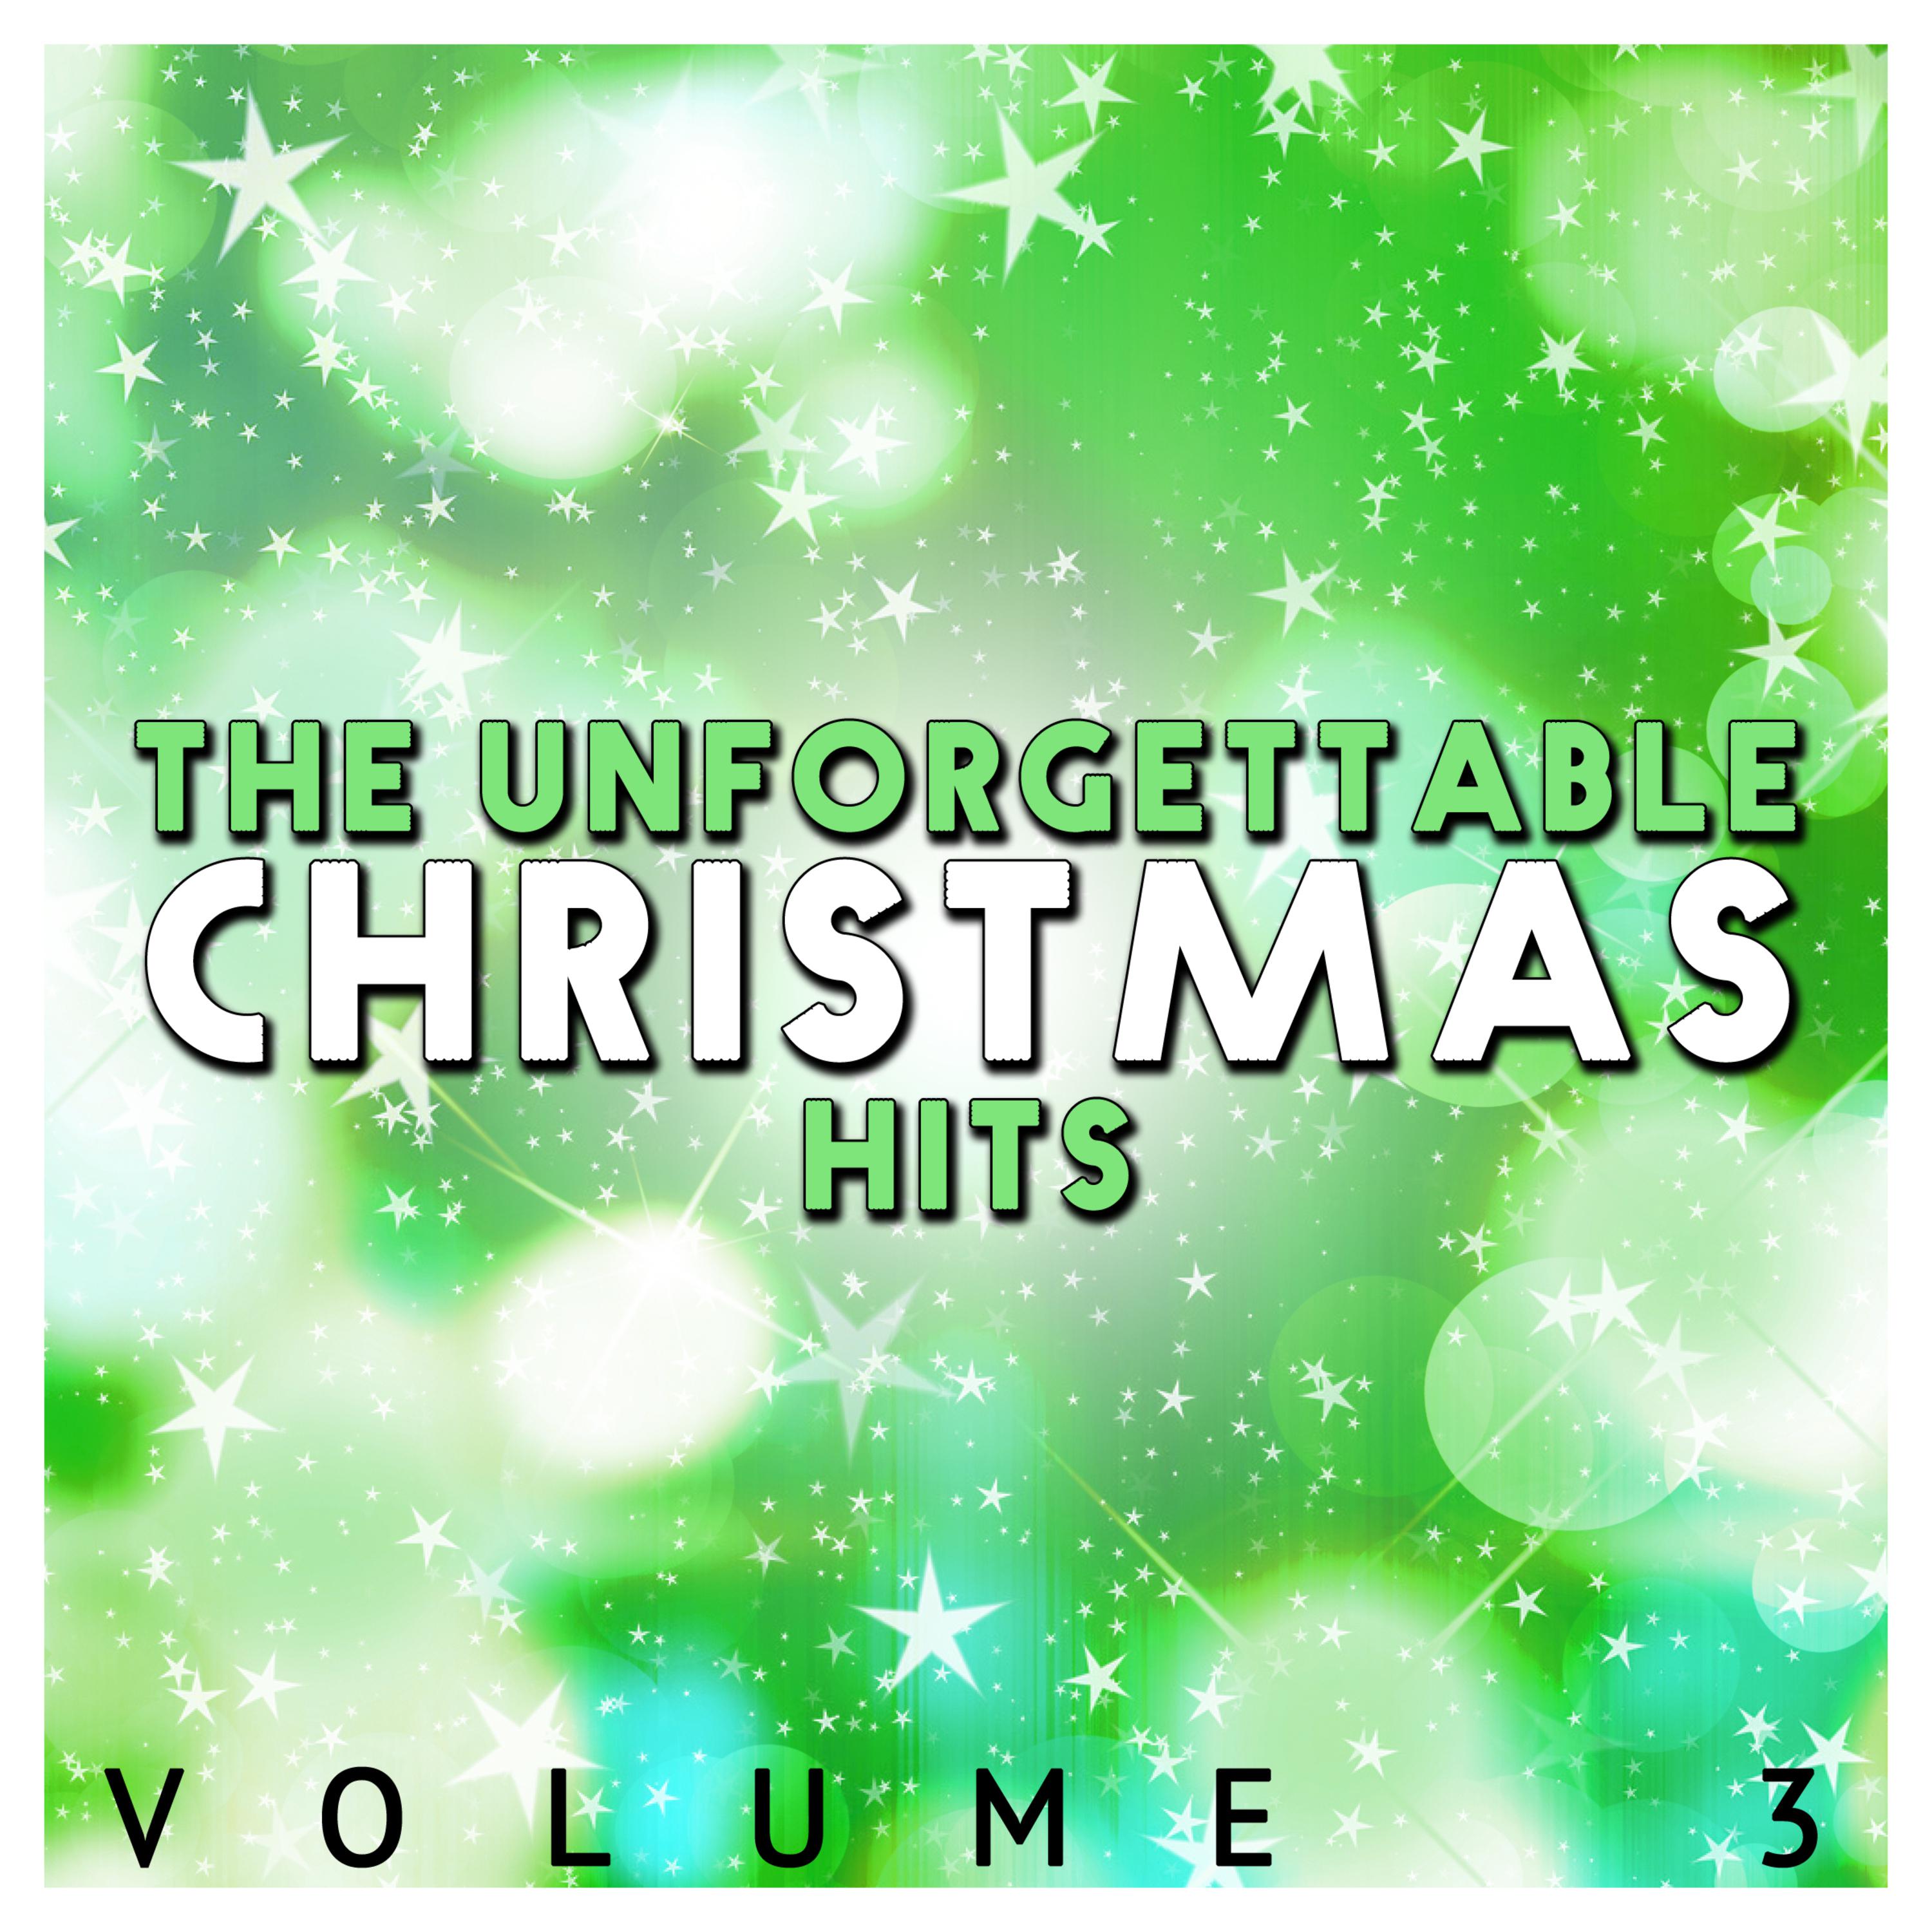 The Unforgettable Christmas Hits: Vol 3